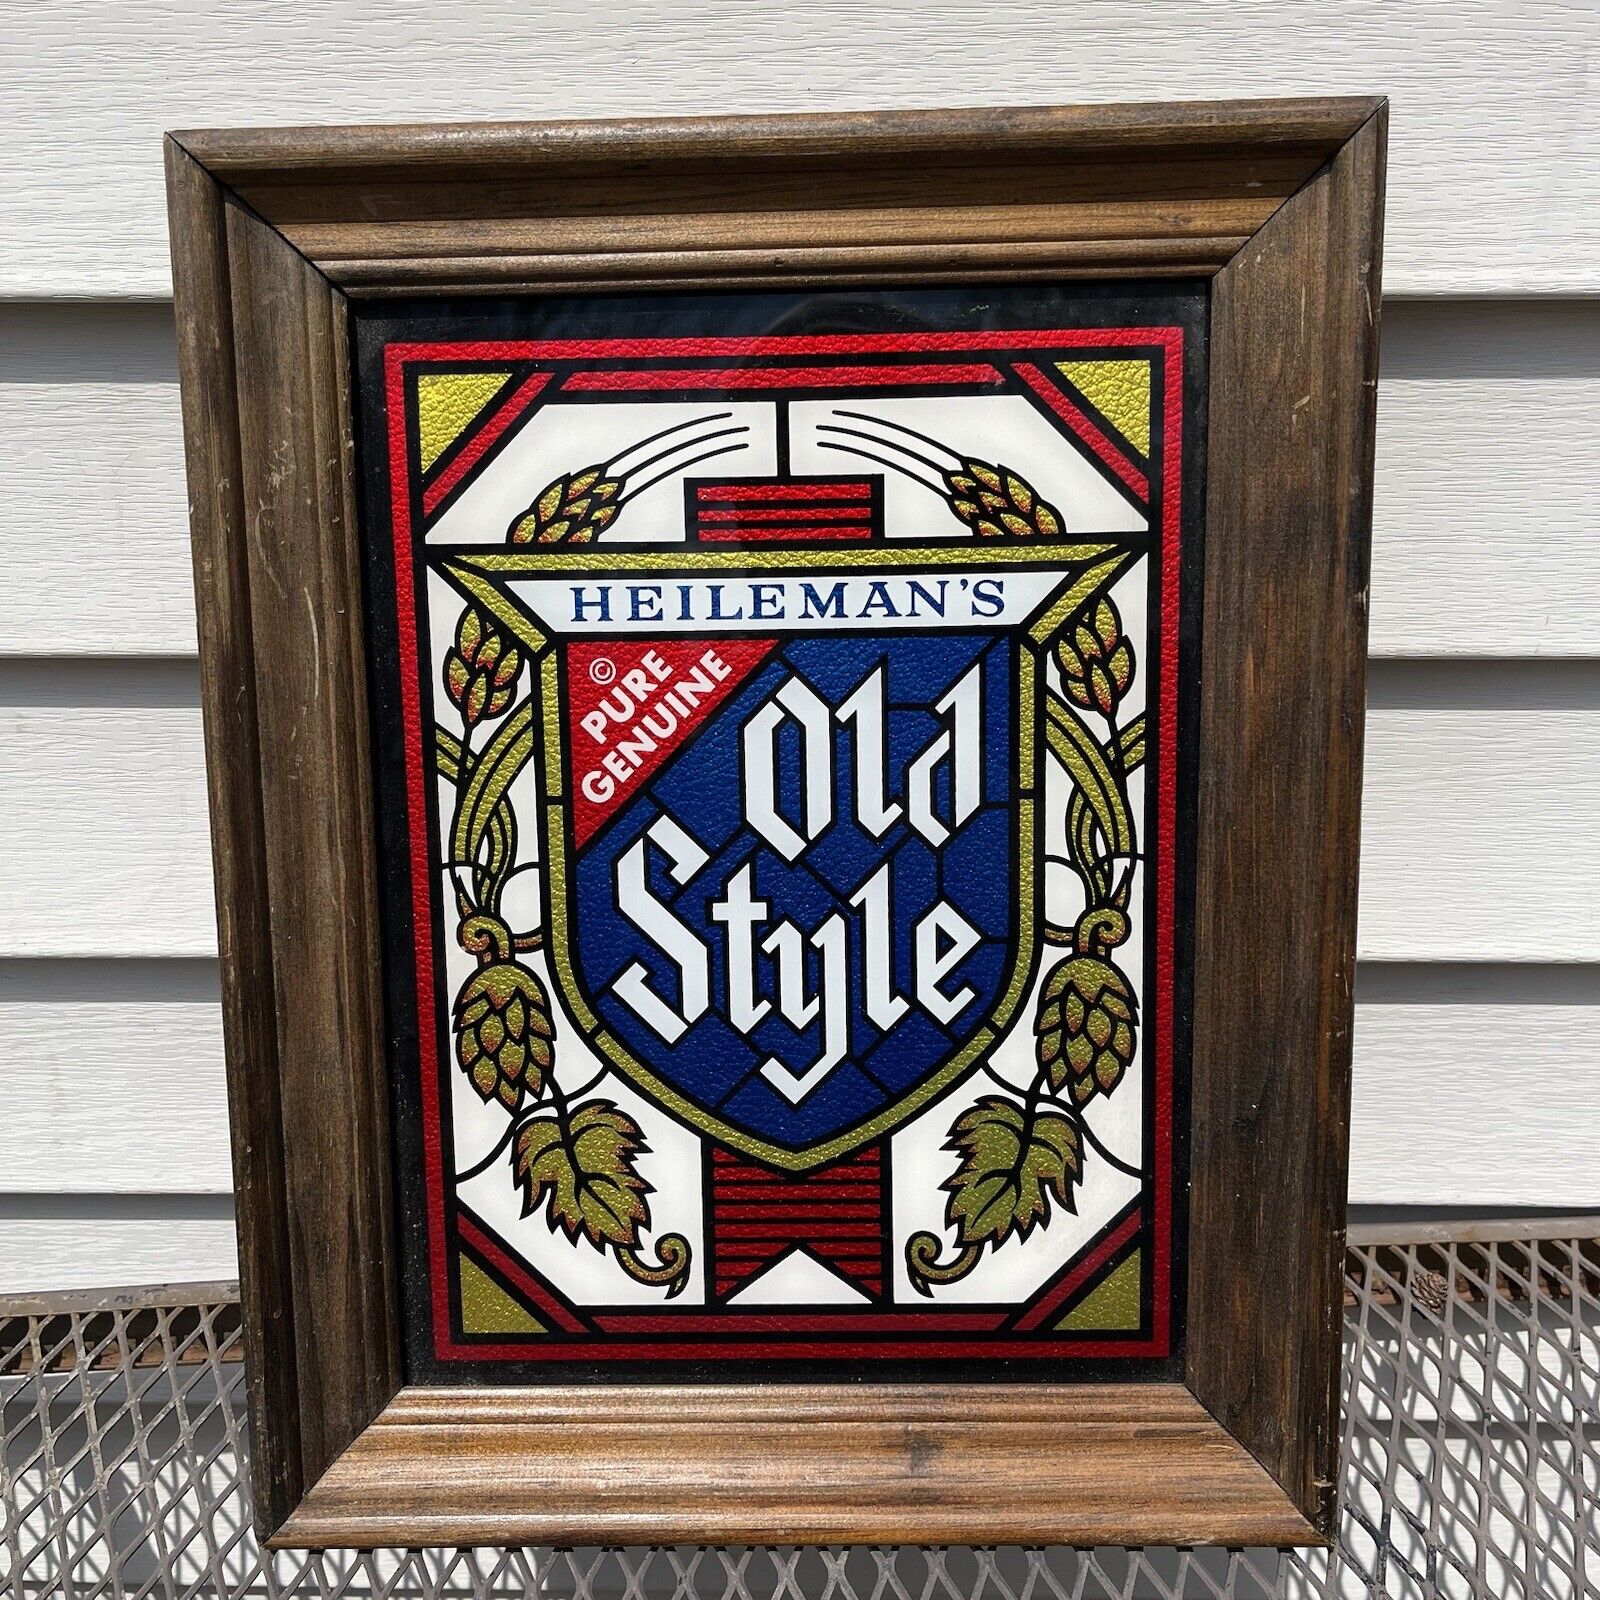 Vintage 1970s 80s Heileman's Old Style Beer Breweriana Bar Framed Mirror Picture